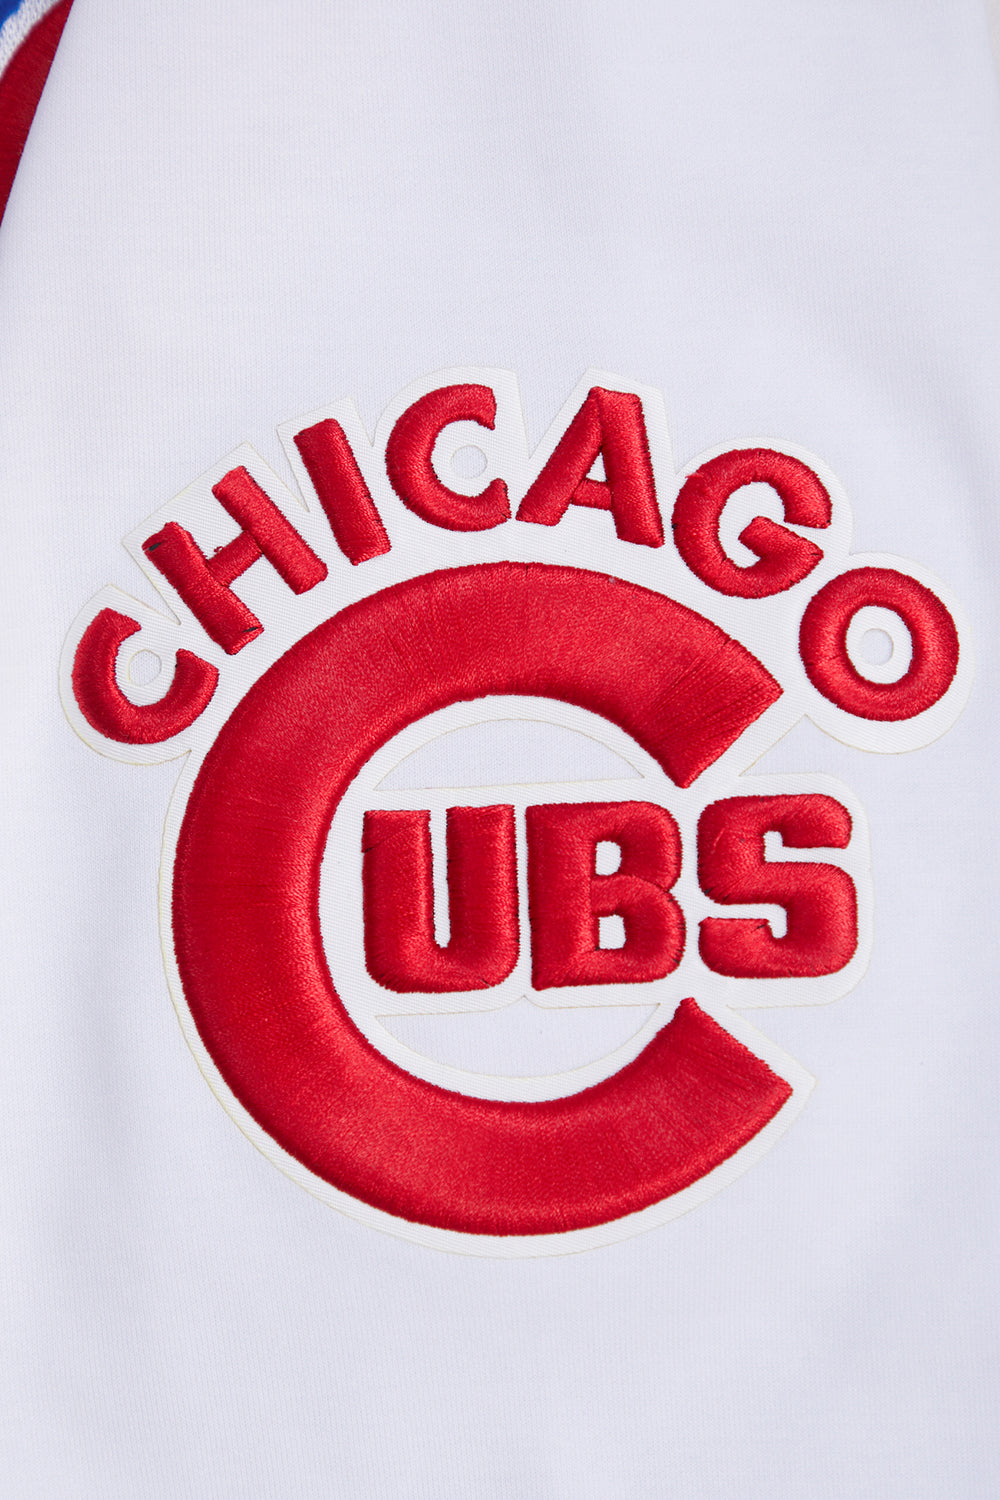 Chicago Cubs Pro Standard Merchandise, Cubs Pro Standard Products